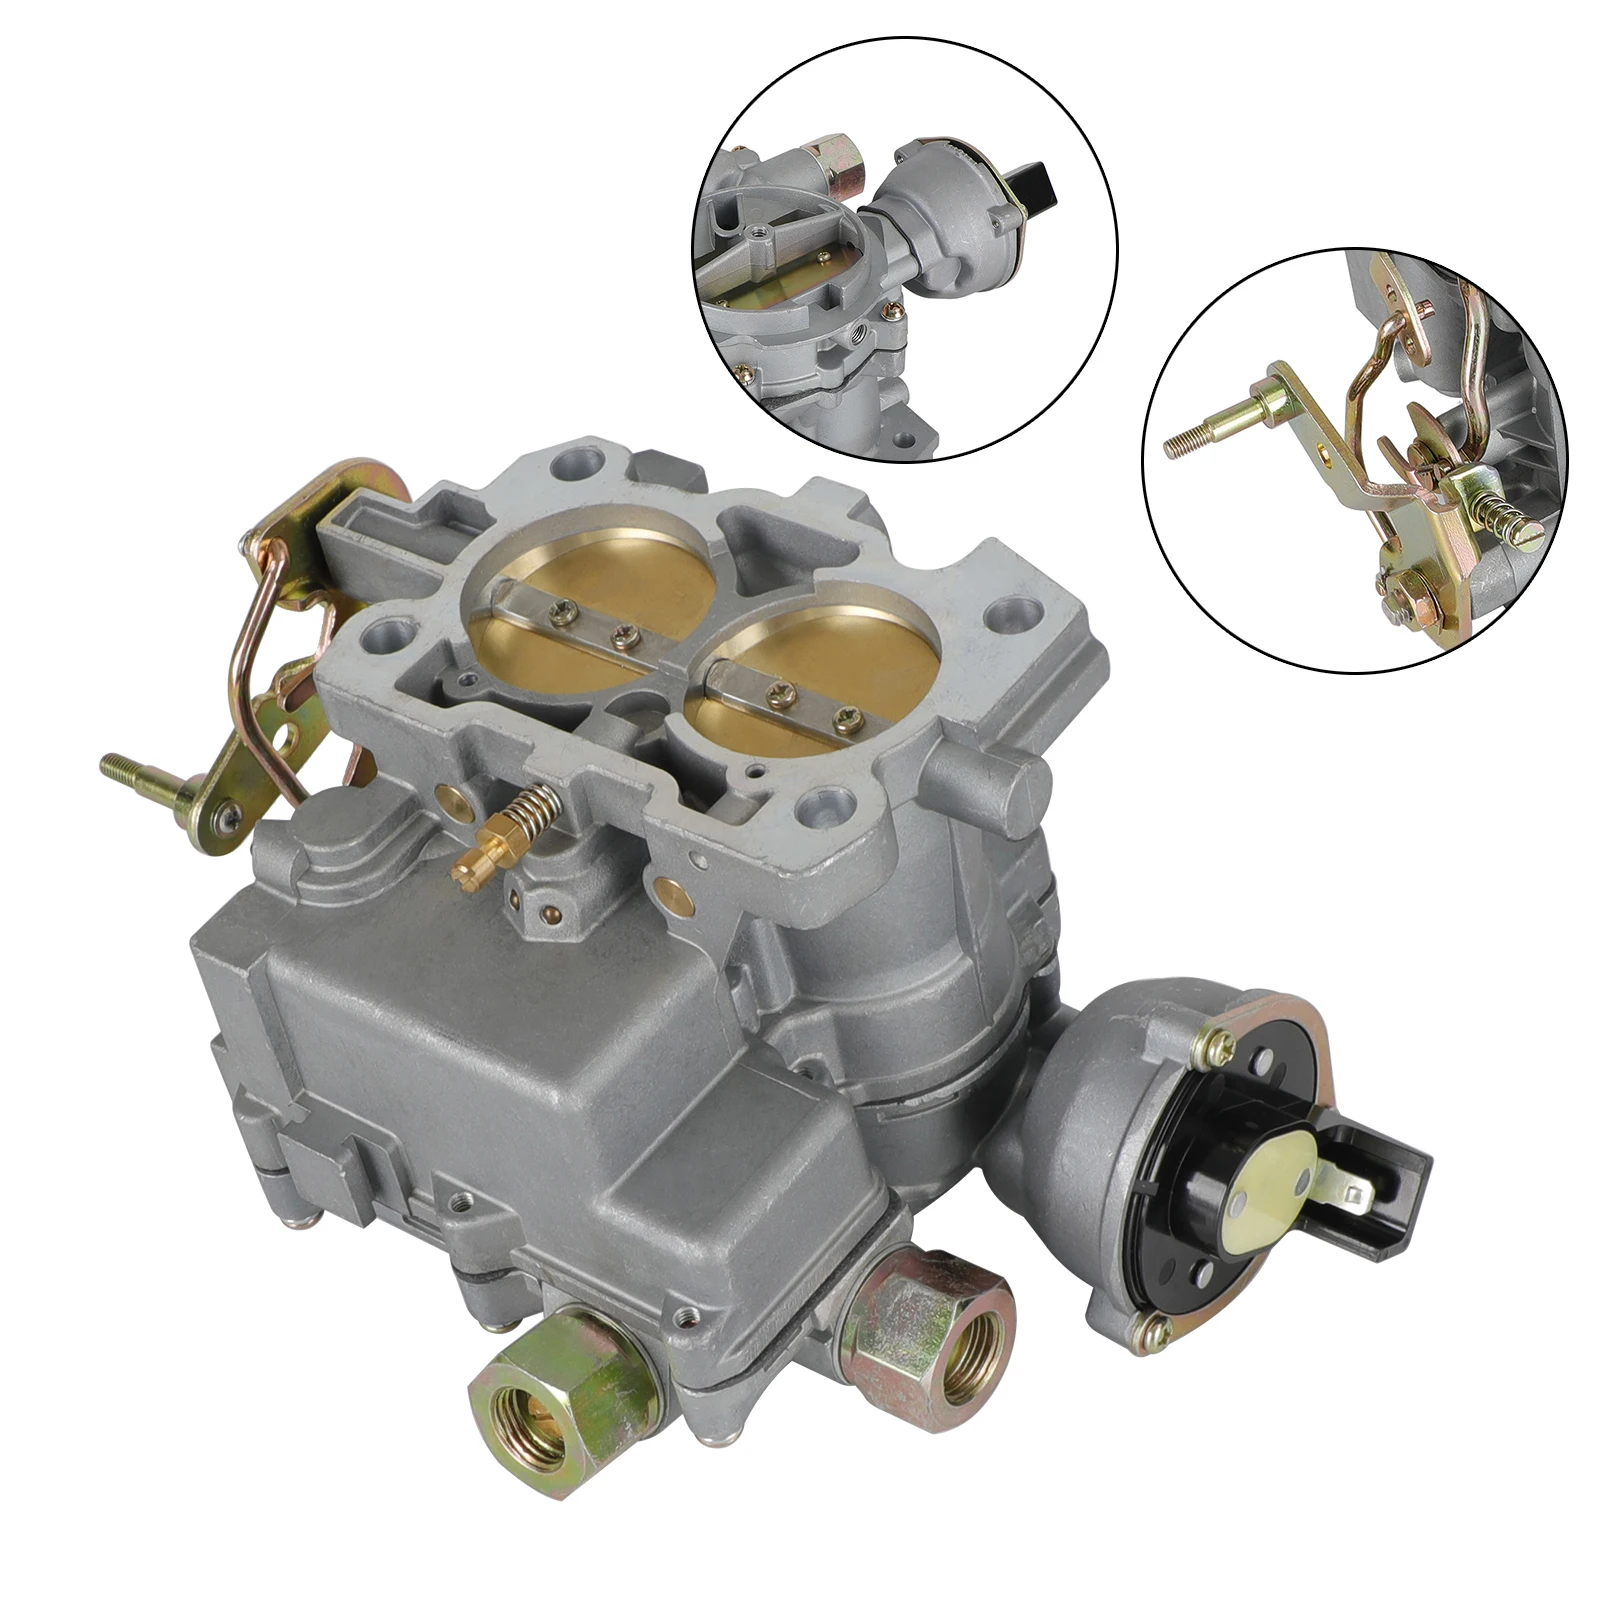 Artudatech Carburetor Carb fit for Marine Mercruiser 2 Barrel 3.0L 4 CYL with a Long Linkage